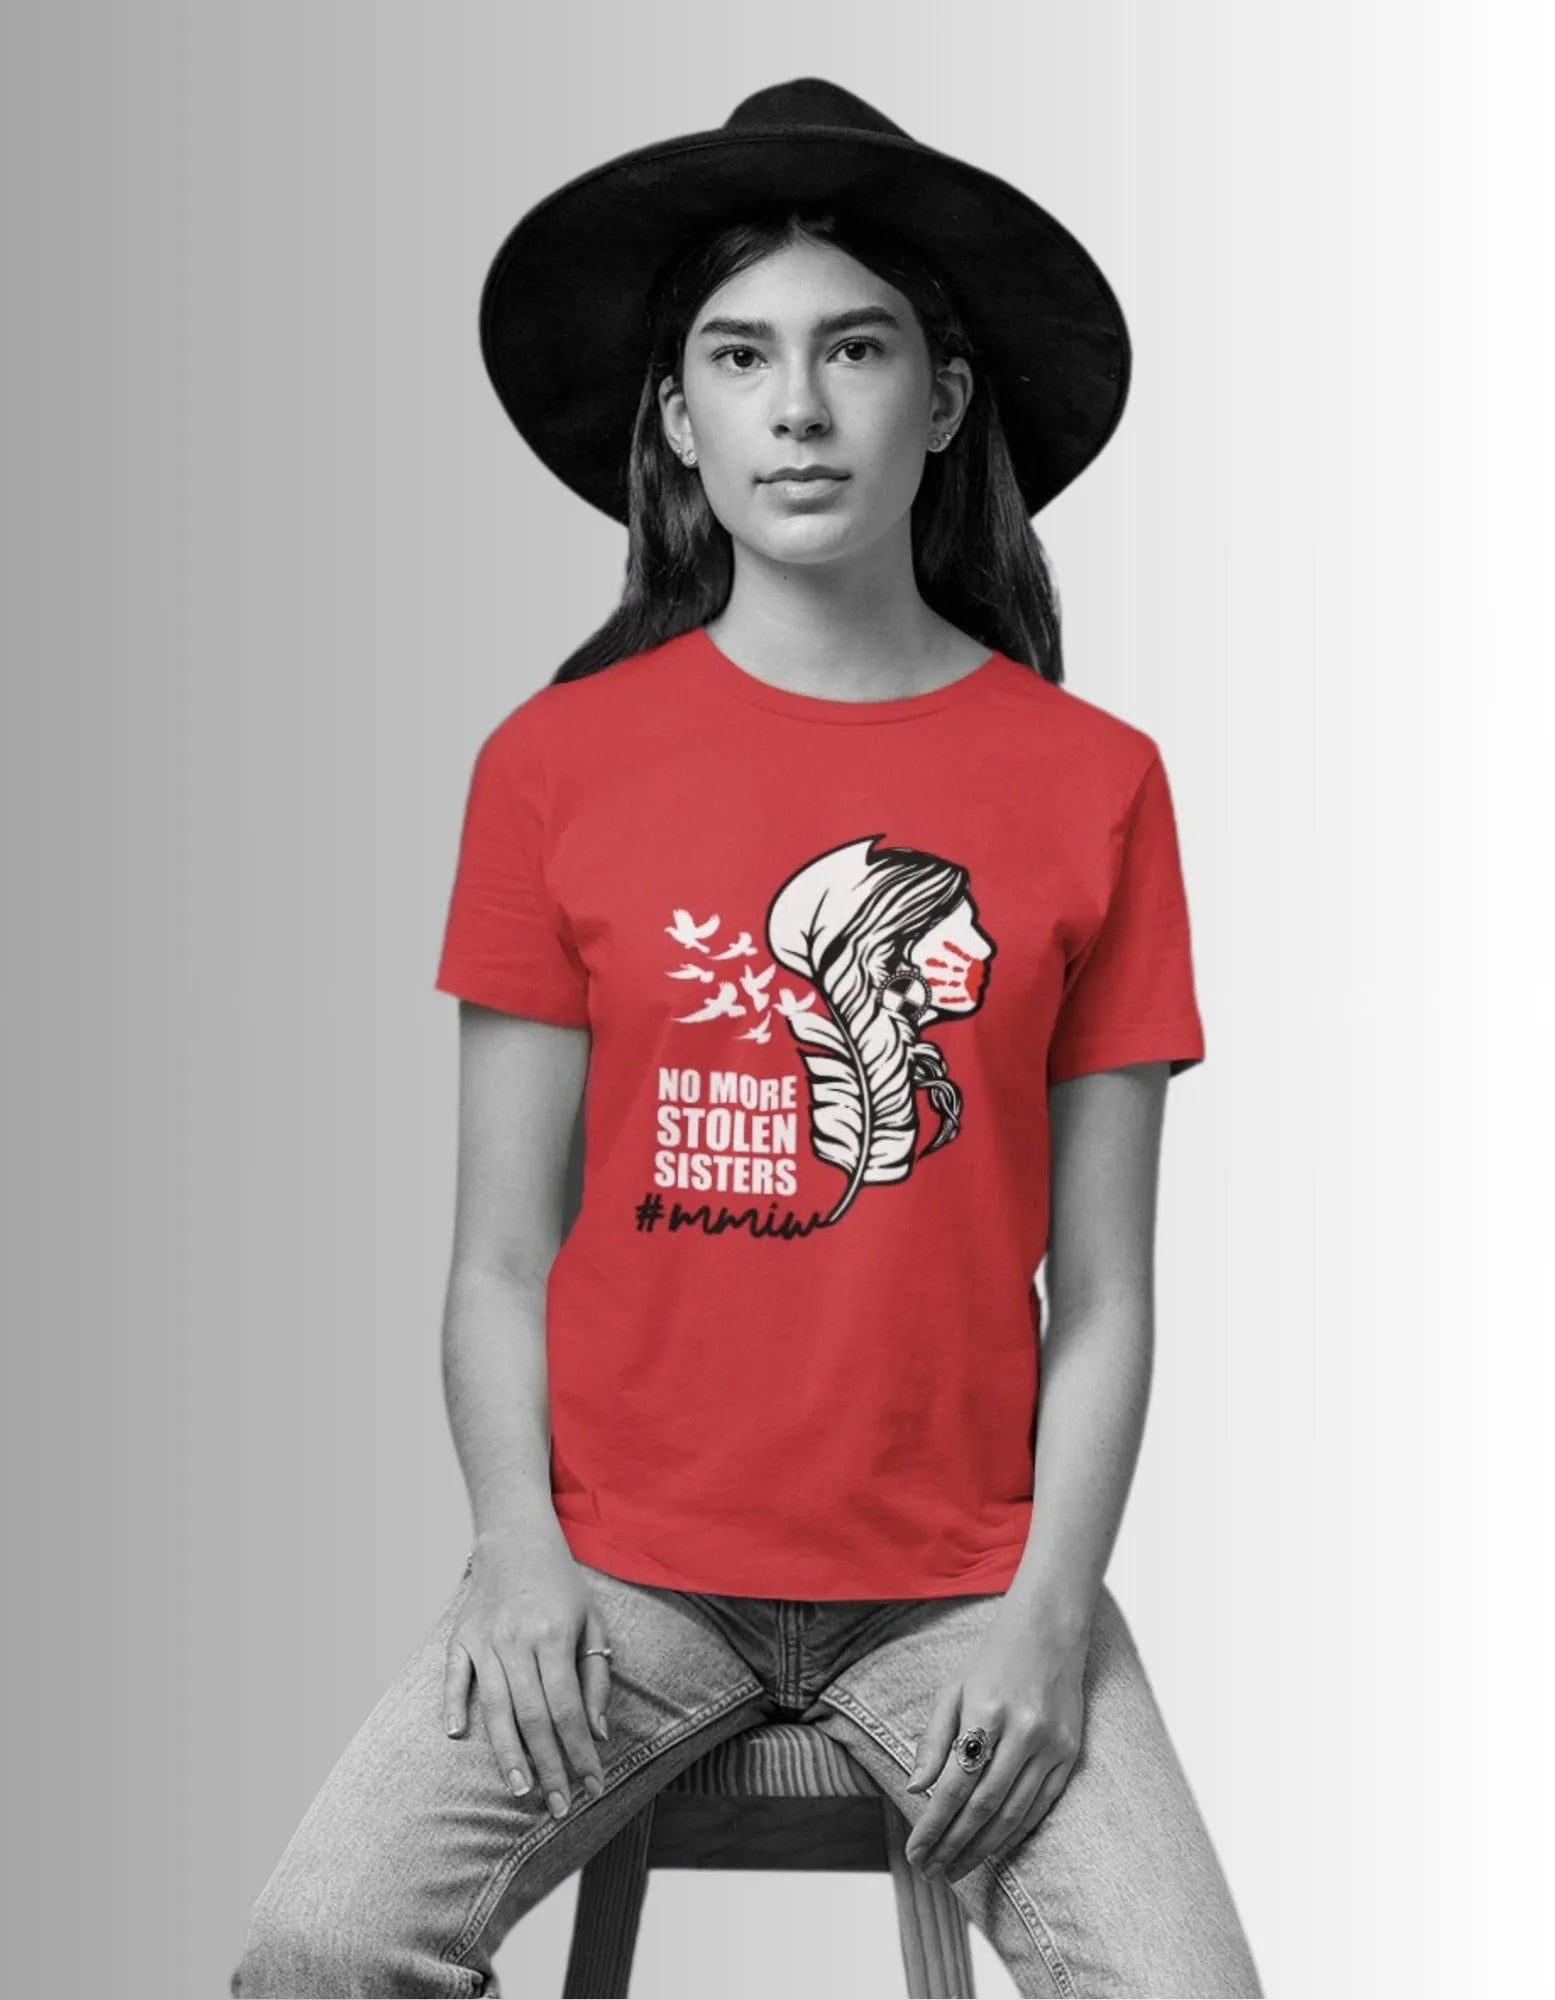 MMIW No More Stolen Sisters Feather T-shirt